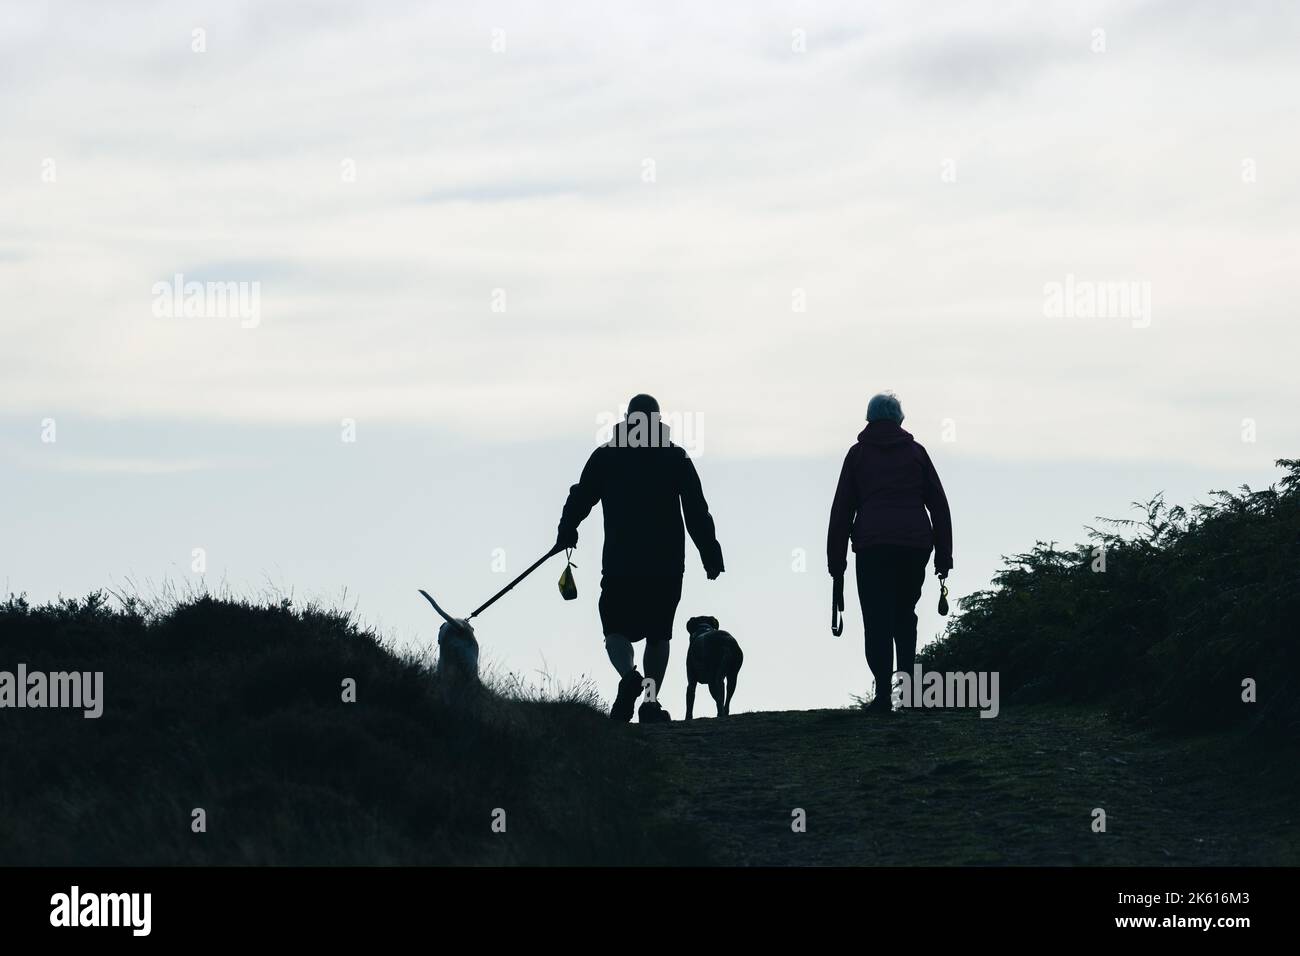 Silhouette of two people walking two dogs on and off lead each carrying a poo bag reflecting responsible dog ownership, Ilkley Moor, England, UK Stock Photo